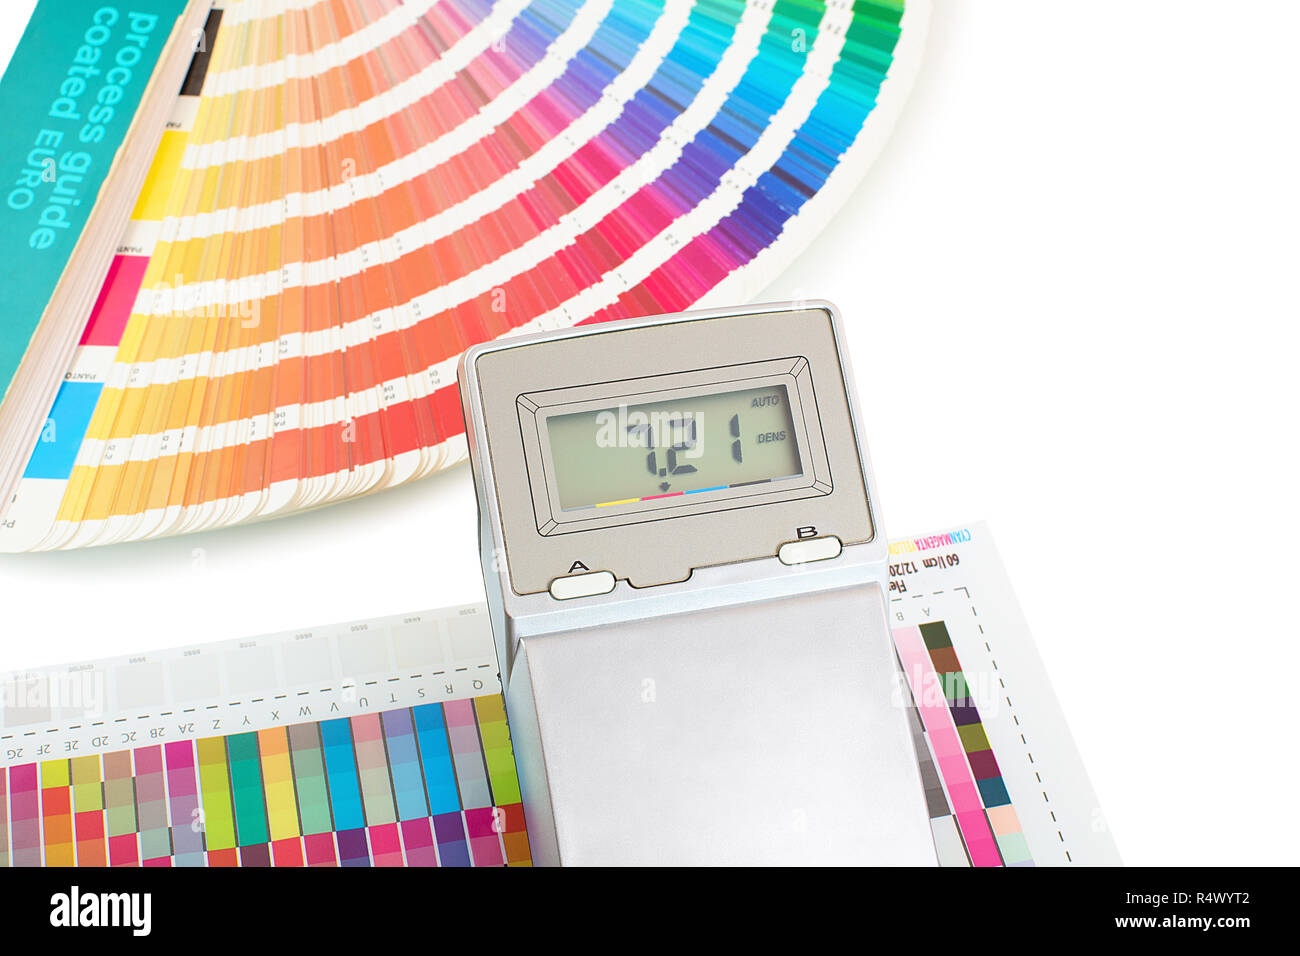 Printed color swatch with density meter and paint guide isolated on white background. Color density check in printing process. Measuring color density Stock Photo